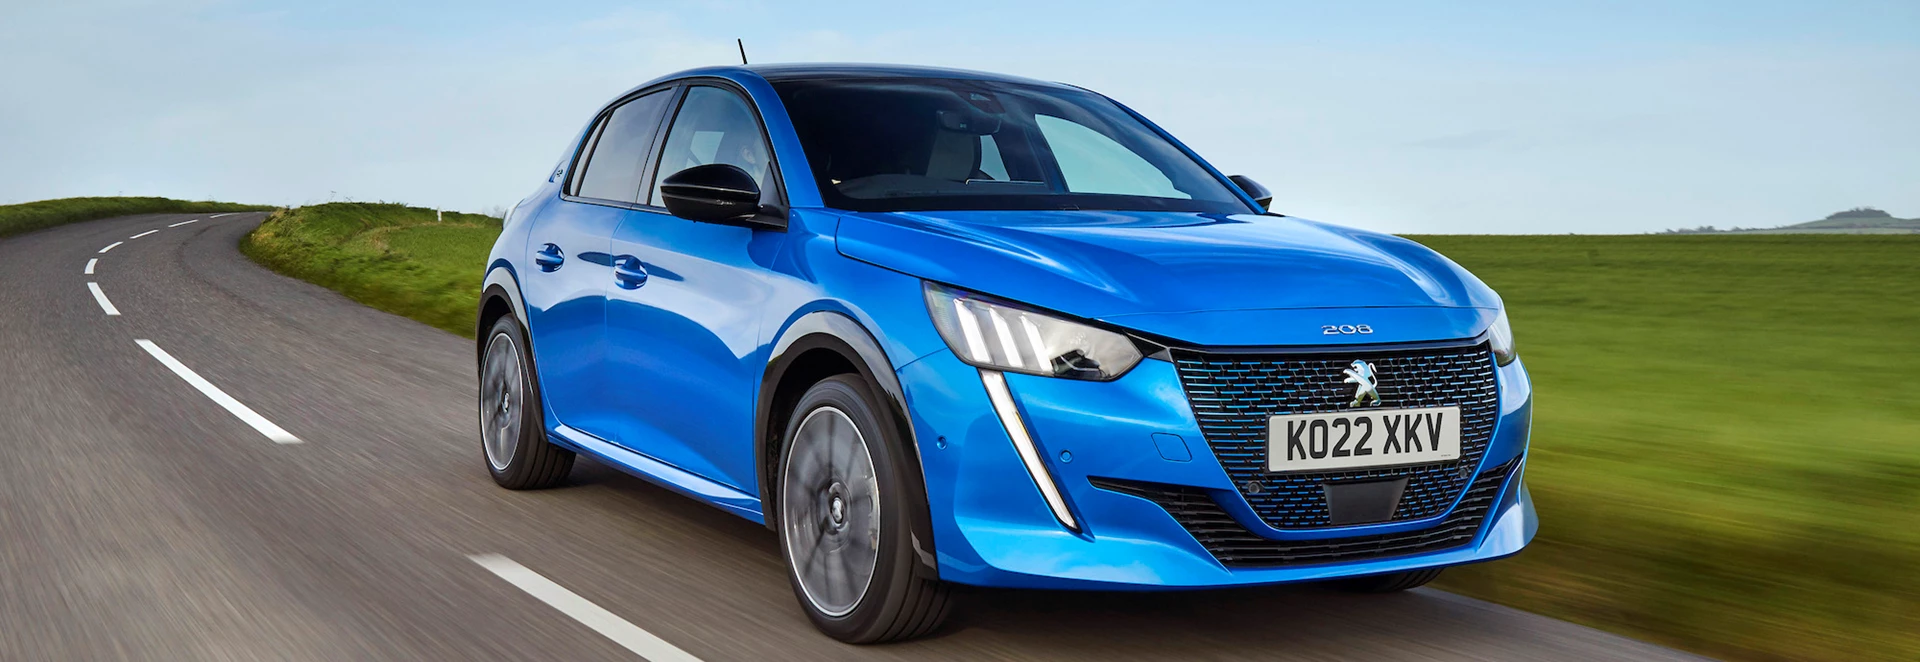 Buyer's guide to the 2023 Peugeot 208 - Car Keys